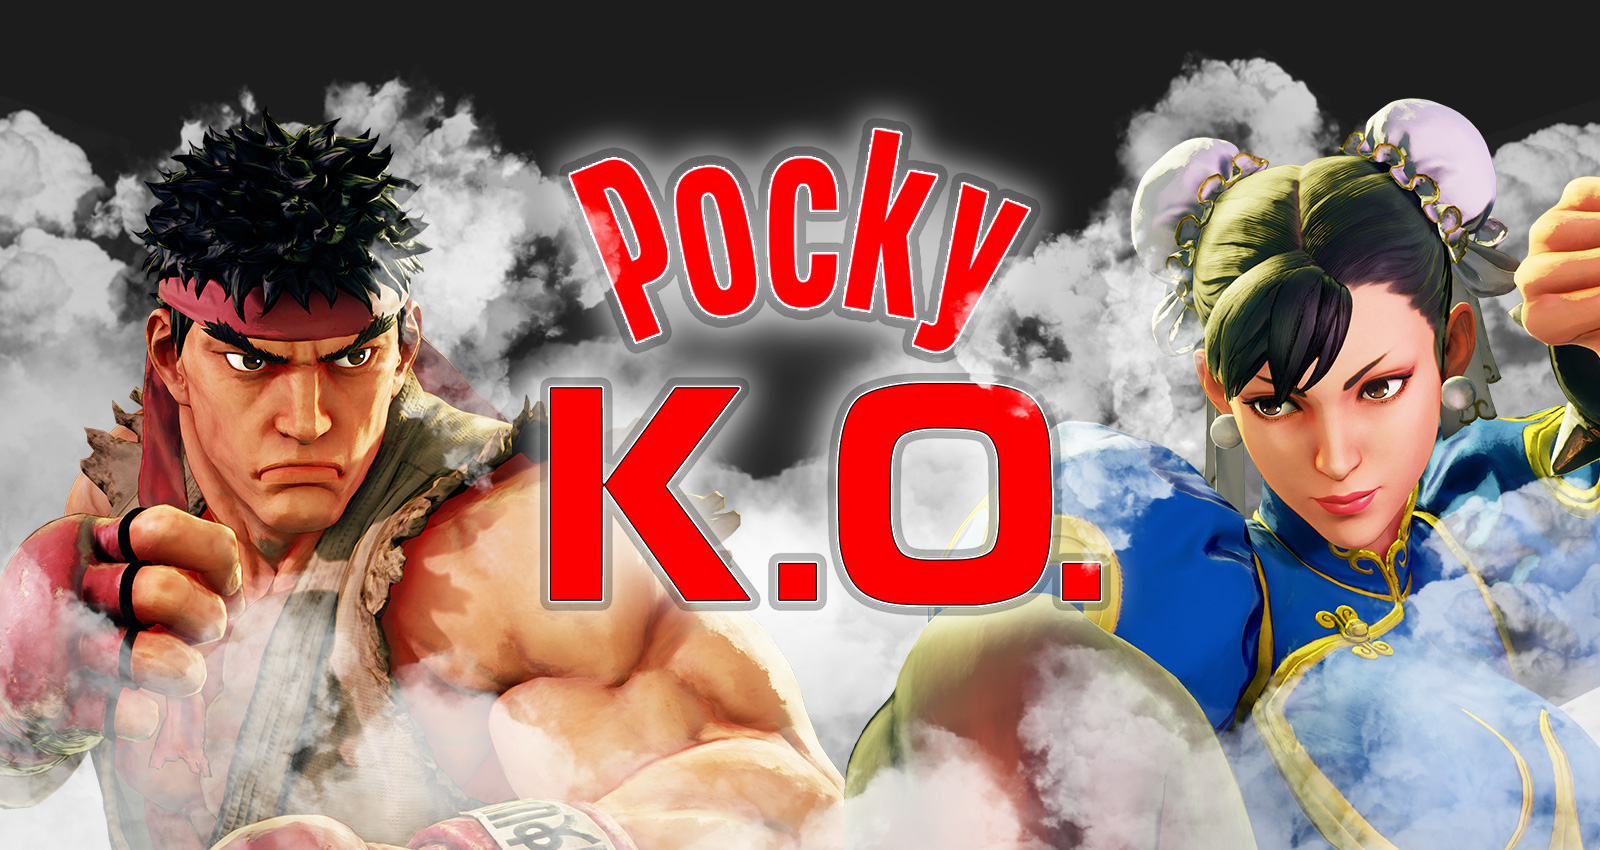 Street Fighter V and Glico Team Up For New Pocky K.O. Challenge Campaign